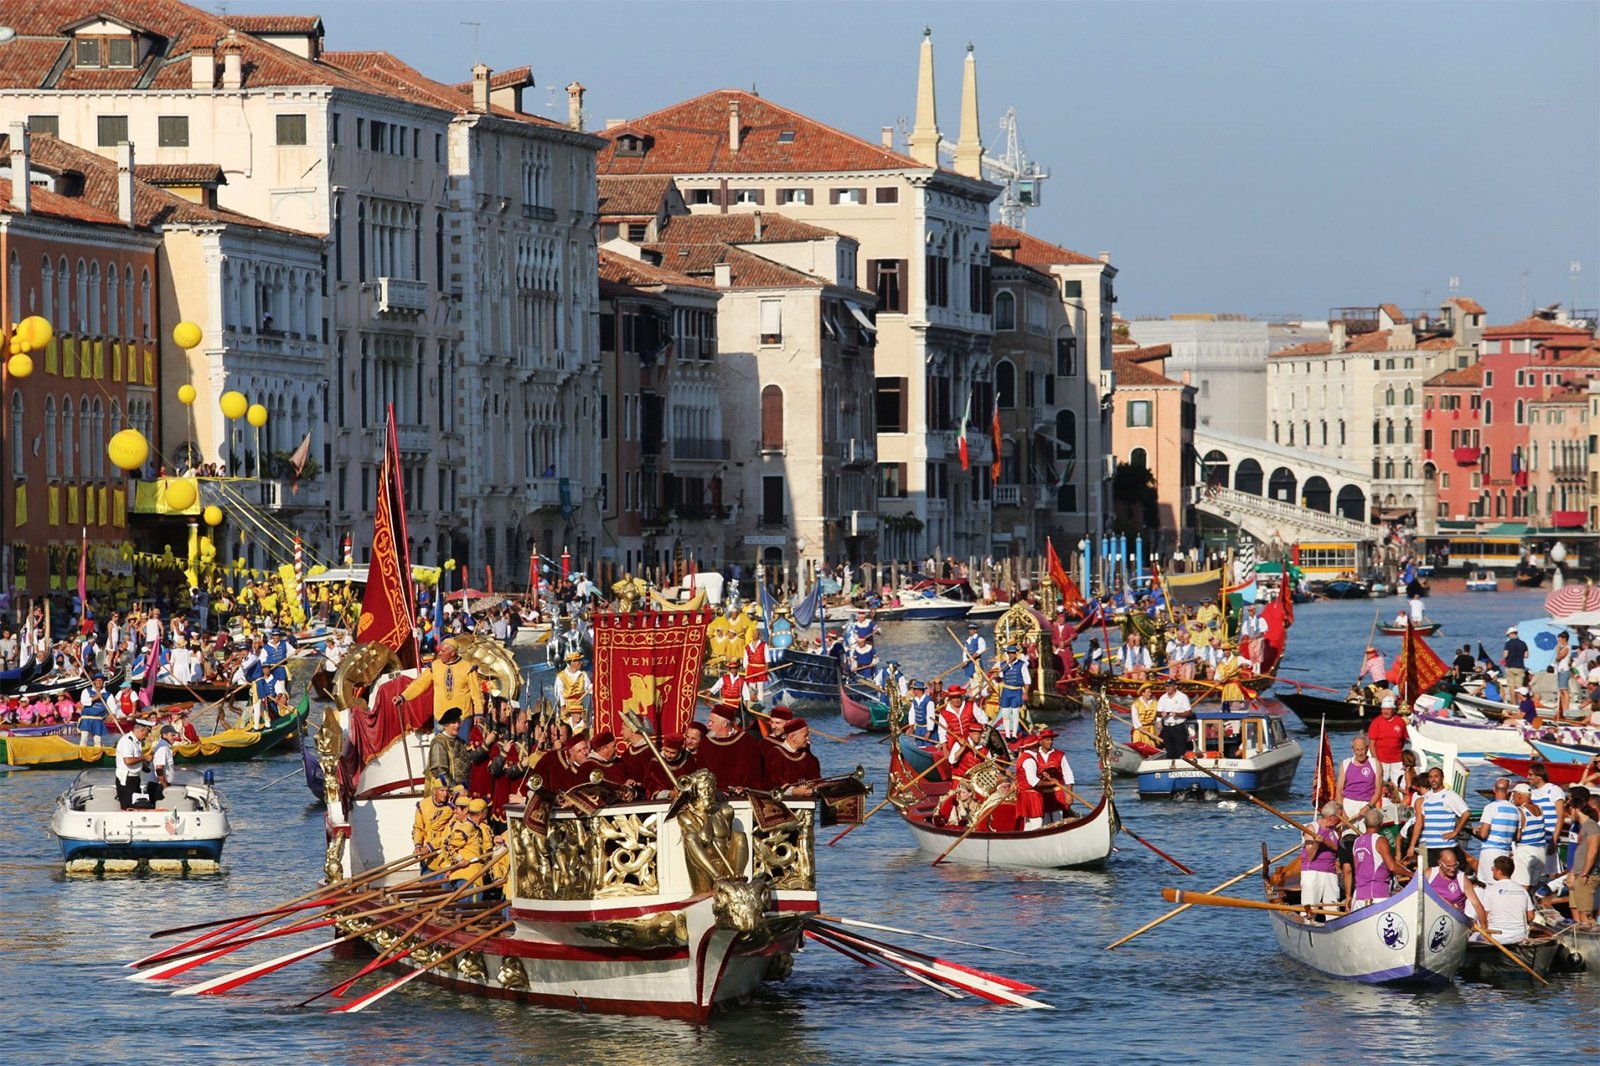 How to watch the Historical Regatta in Venice